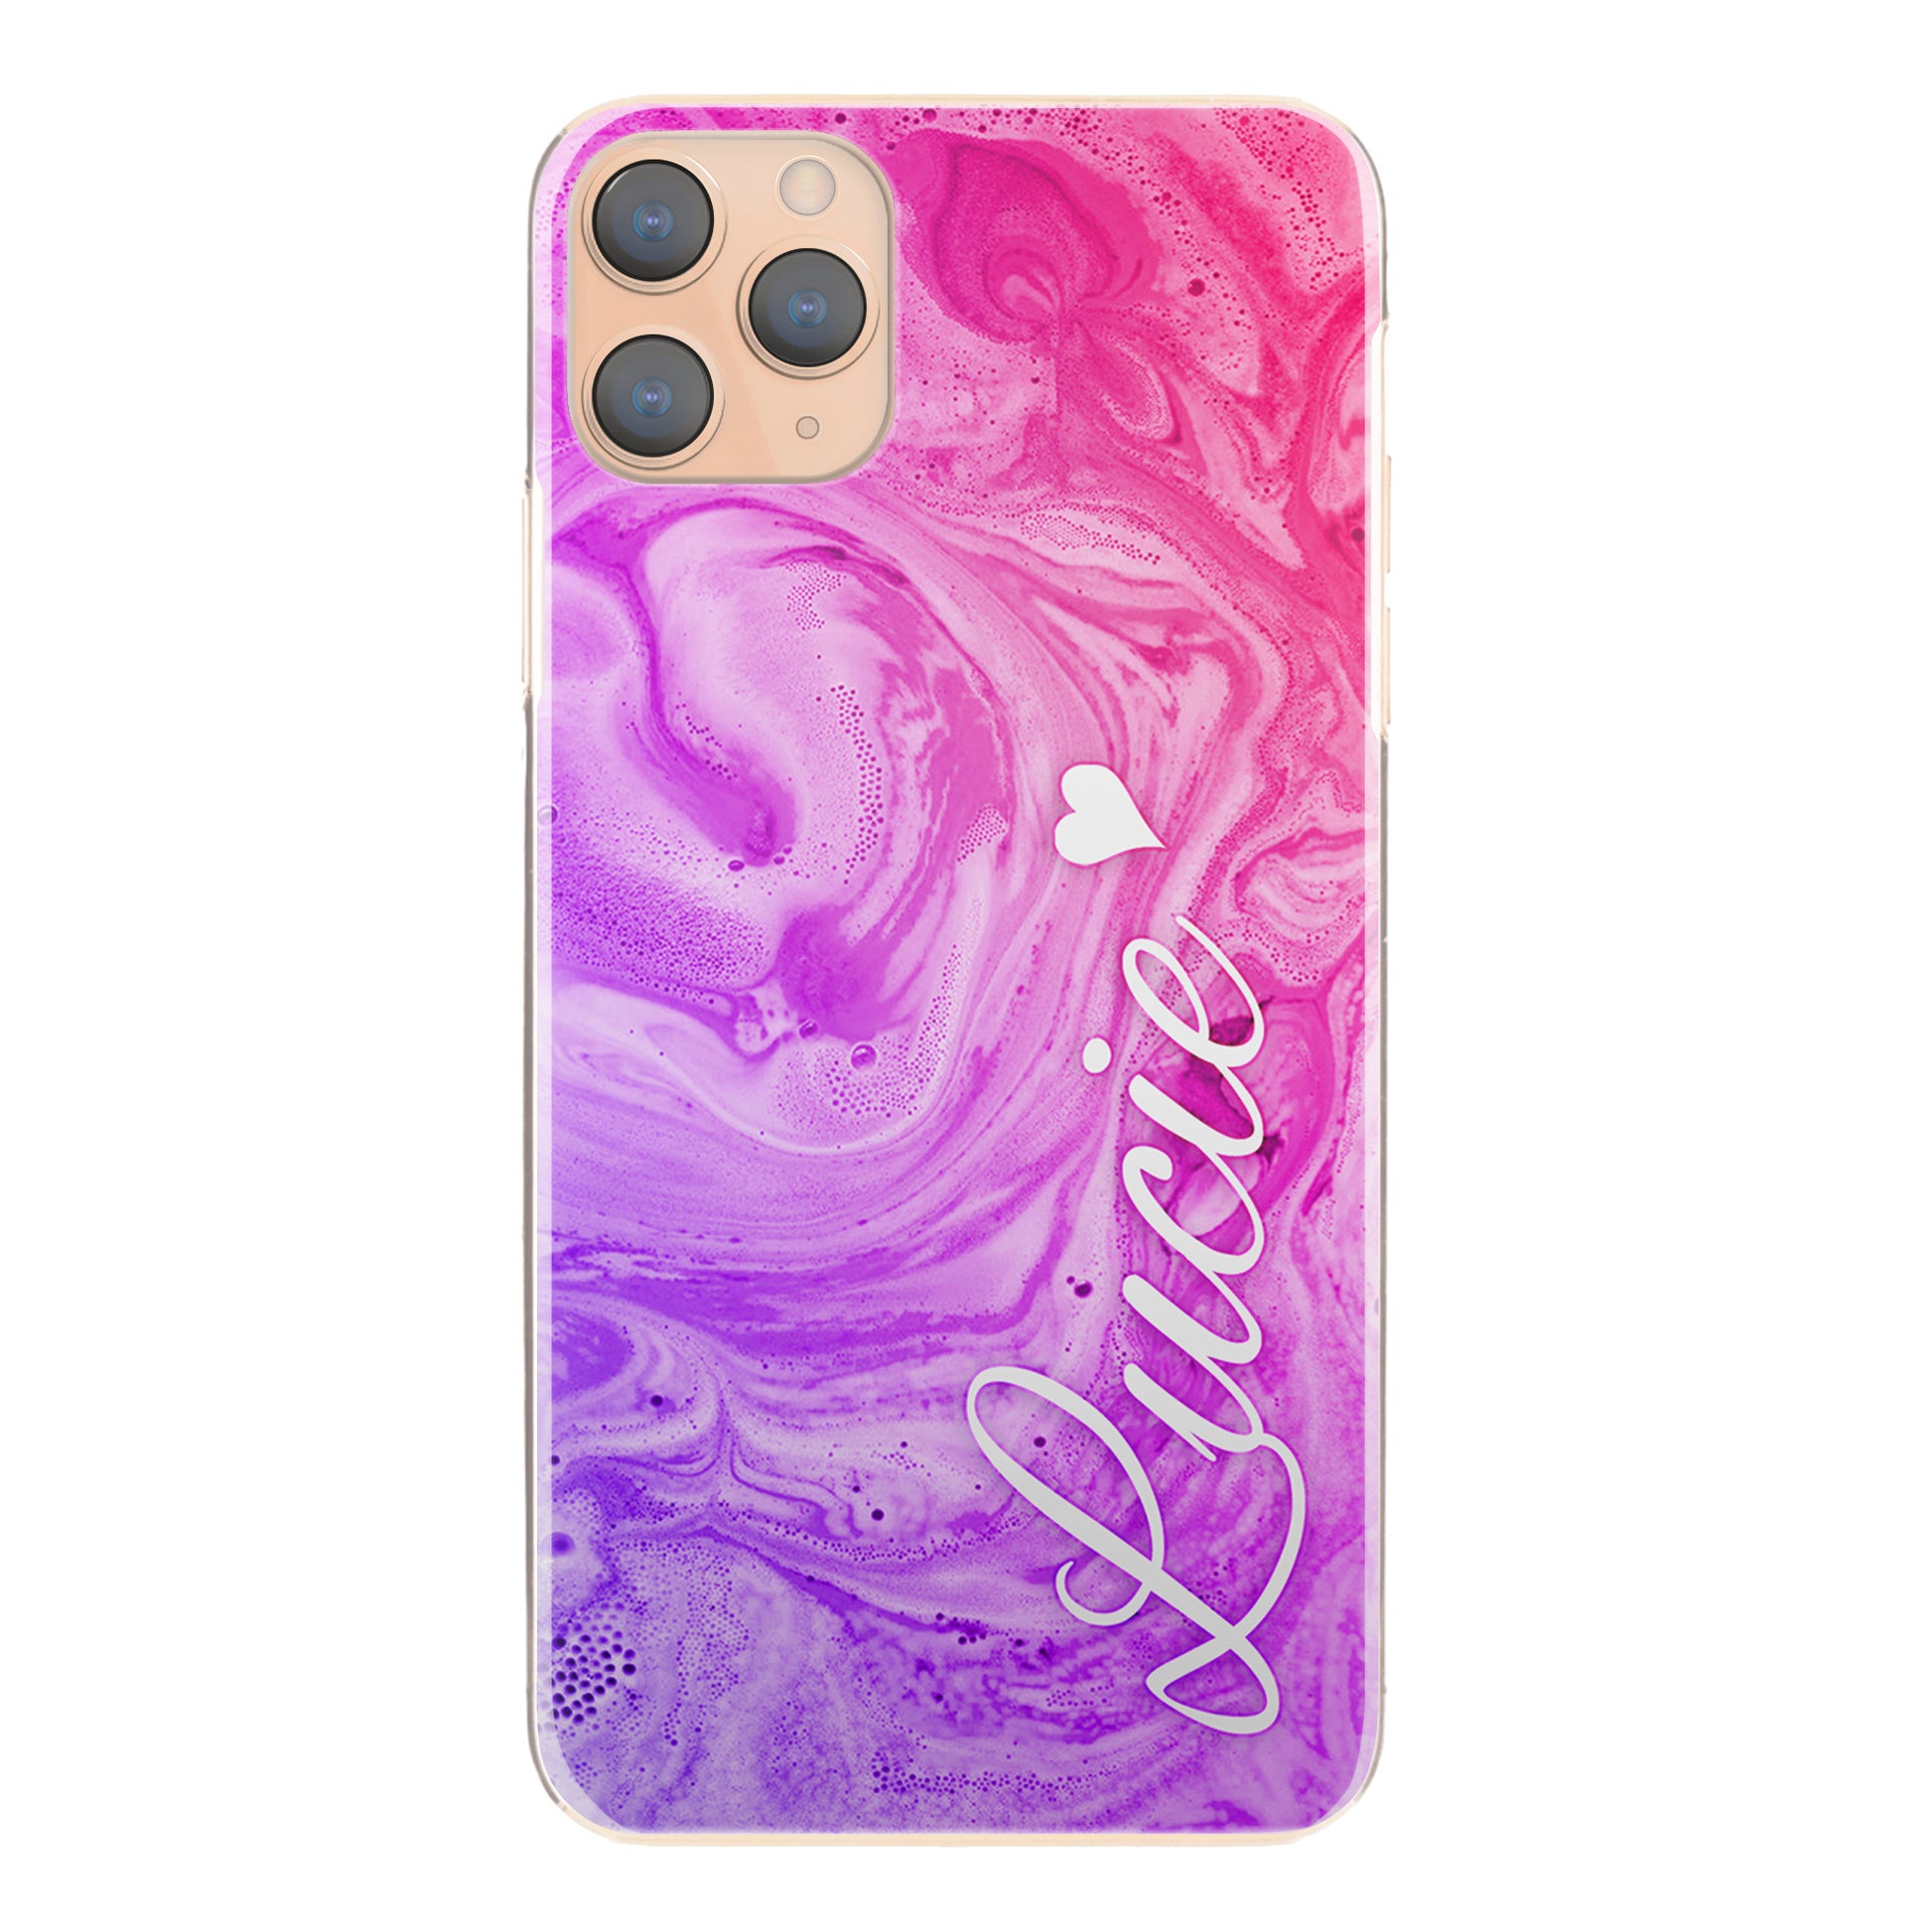 Personalised Nokia Phone Hard Case with Heart Accented Text on Purple Pink Gradient Swirled Marble